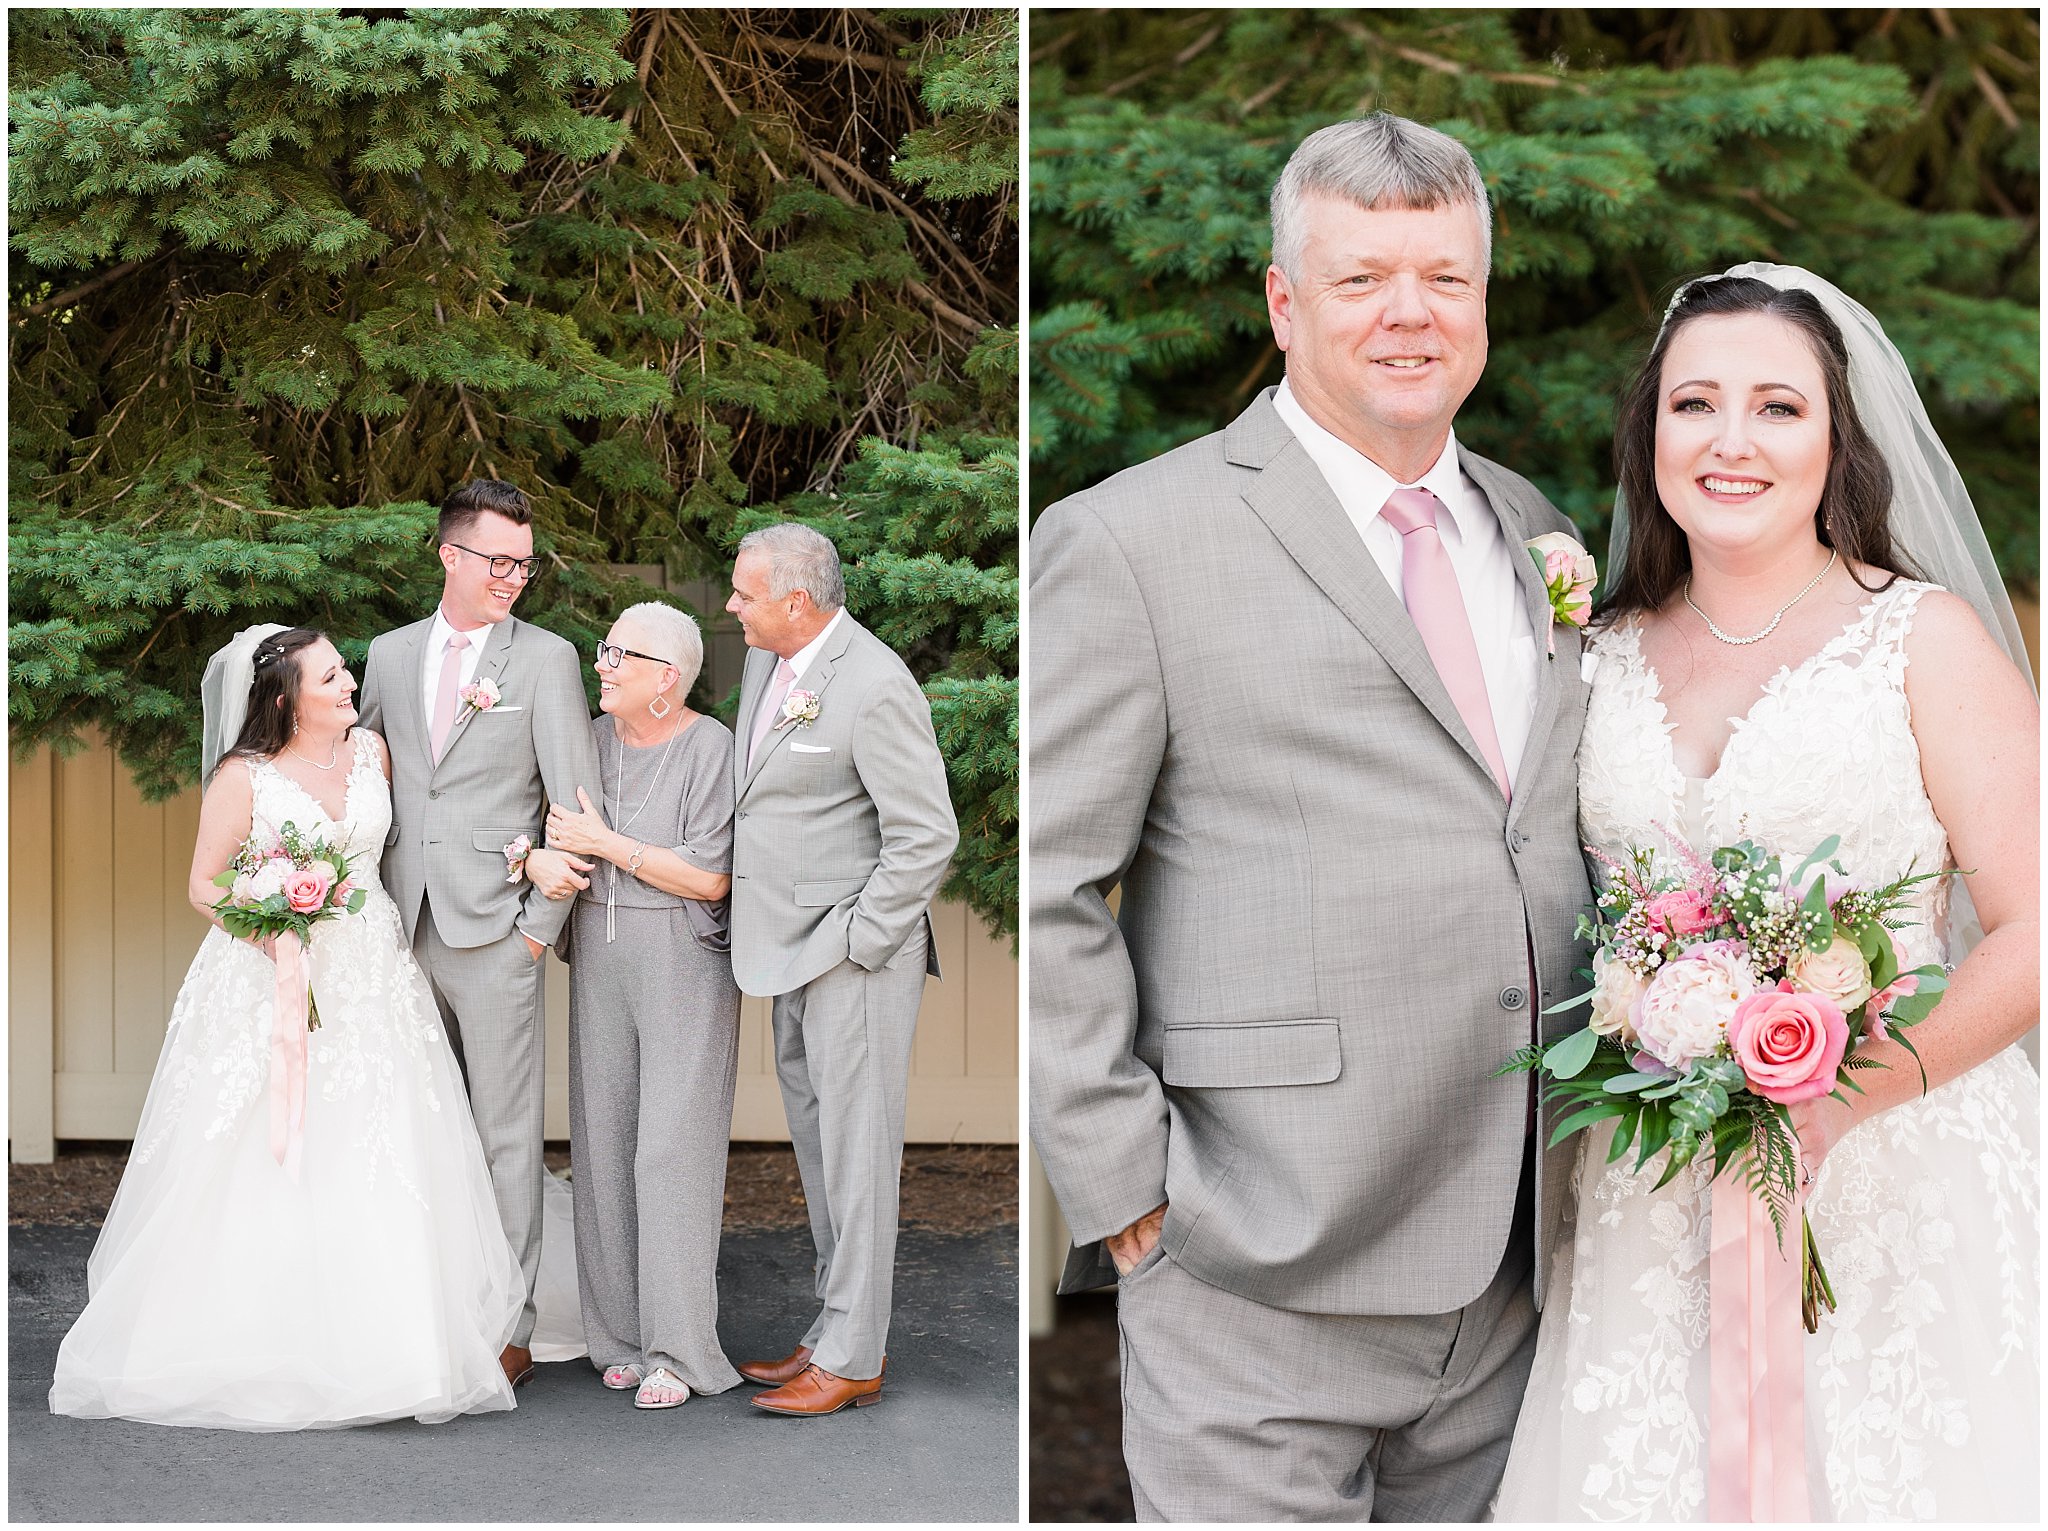 Bride and groom with parents | Oak Hills Utah Dusty Rose and Gray Summer Wedding | Jessie and Dallin Photography